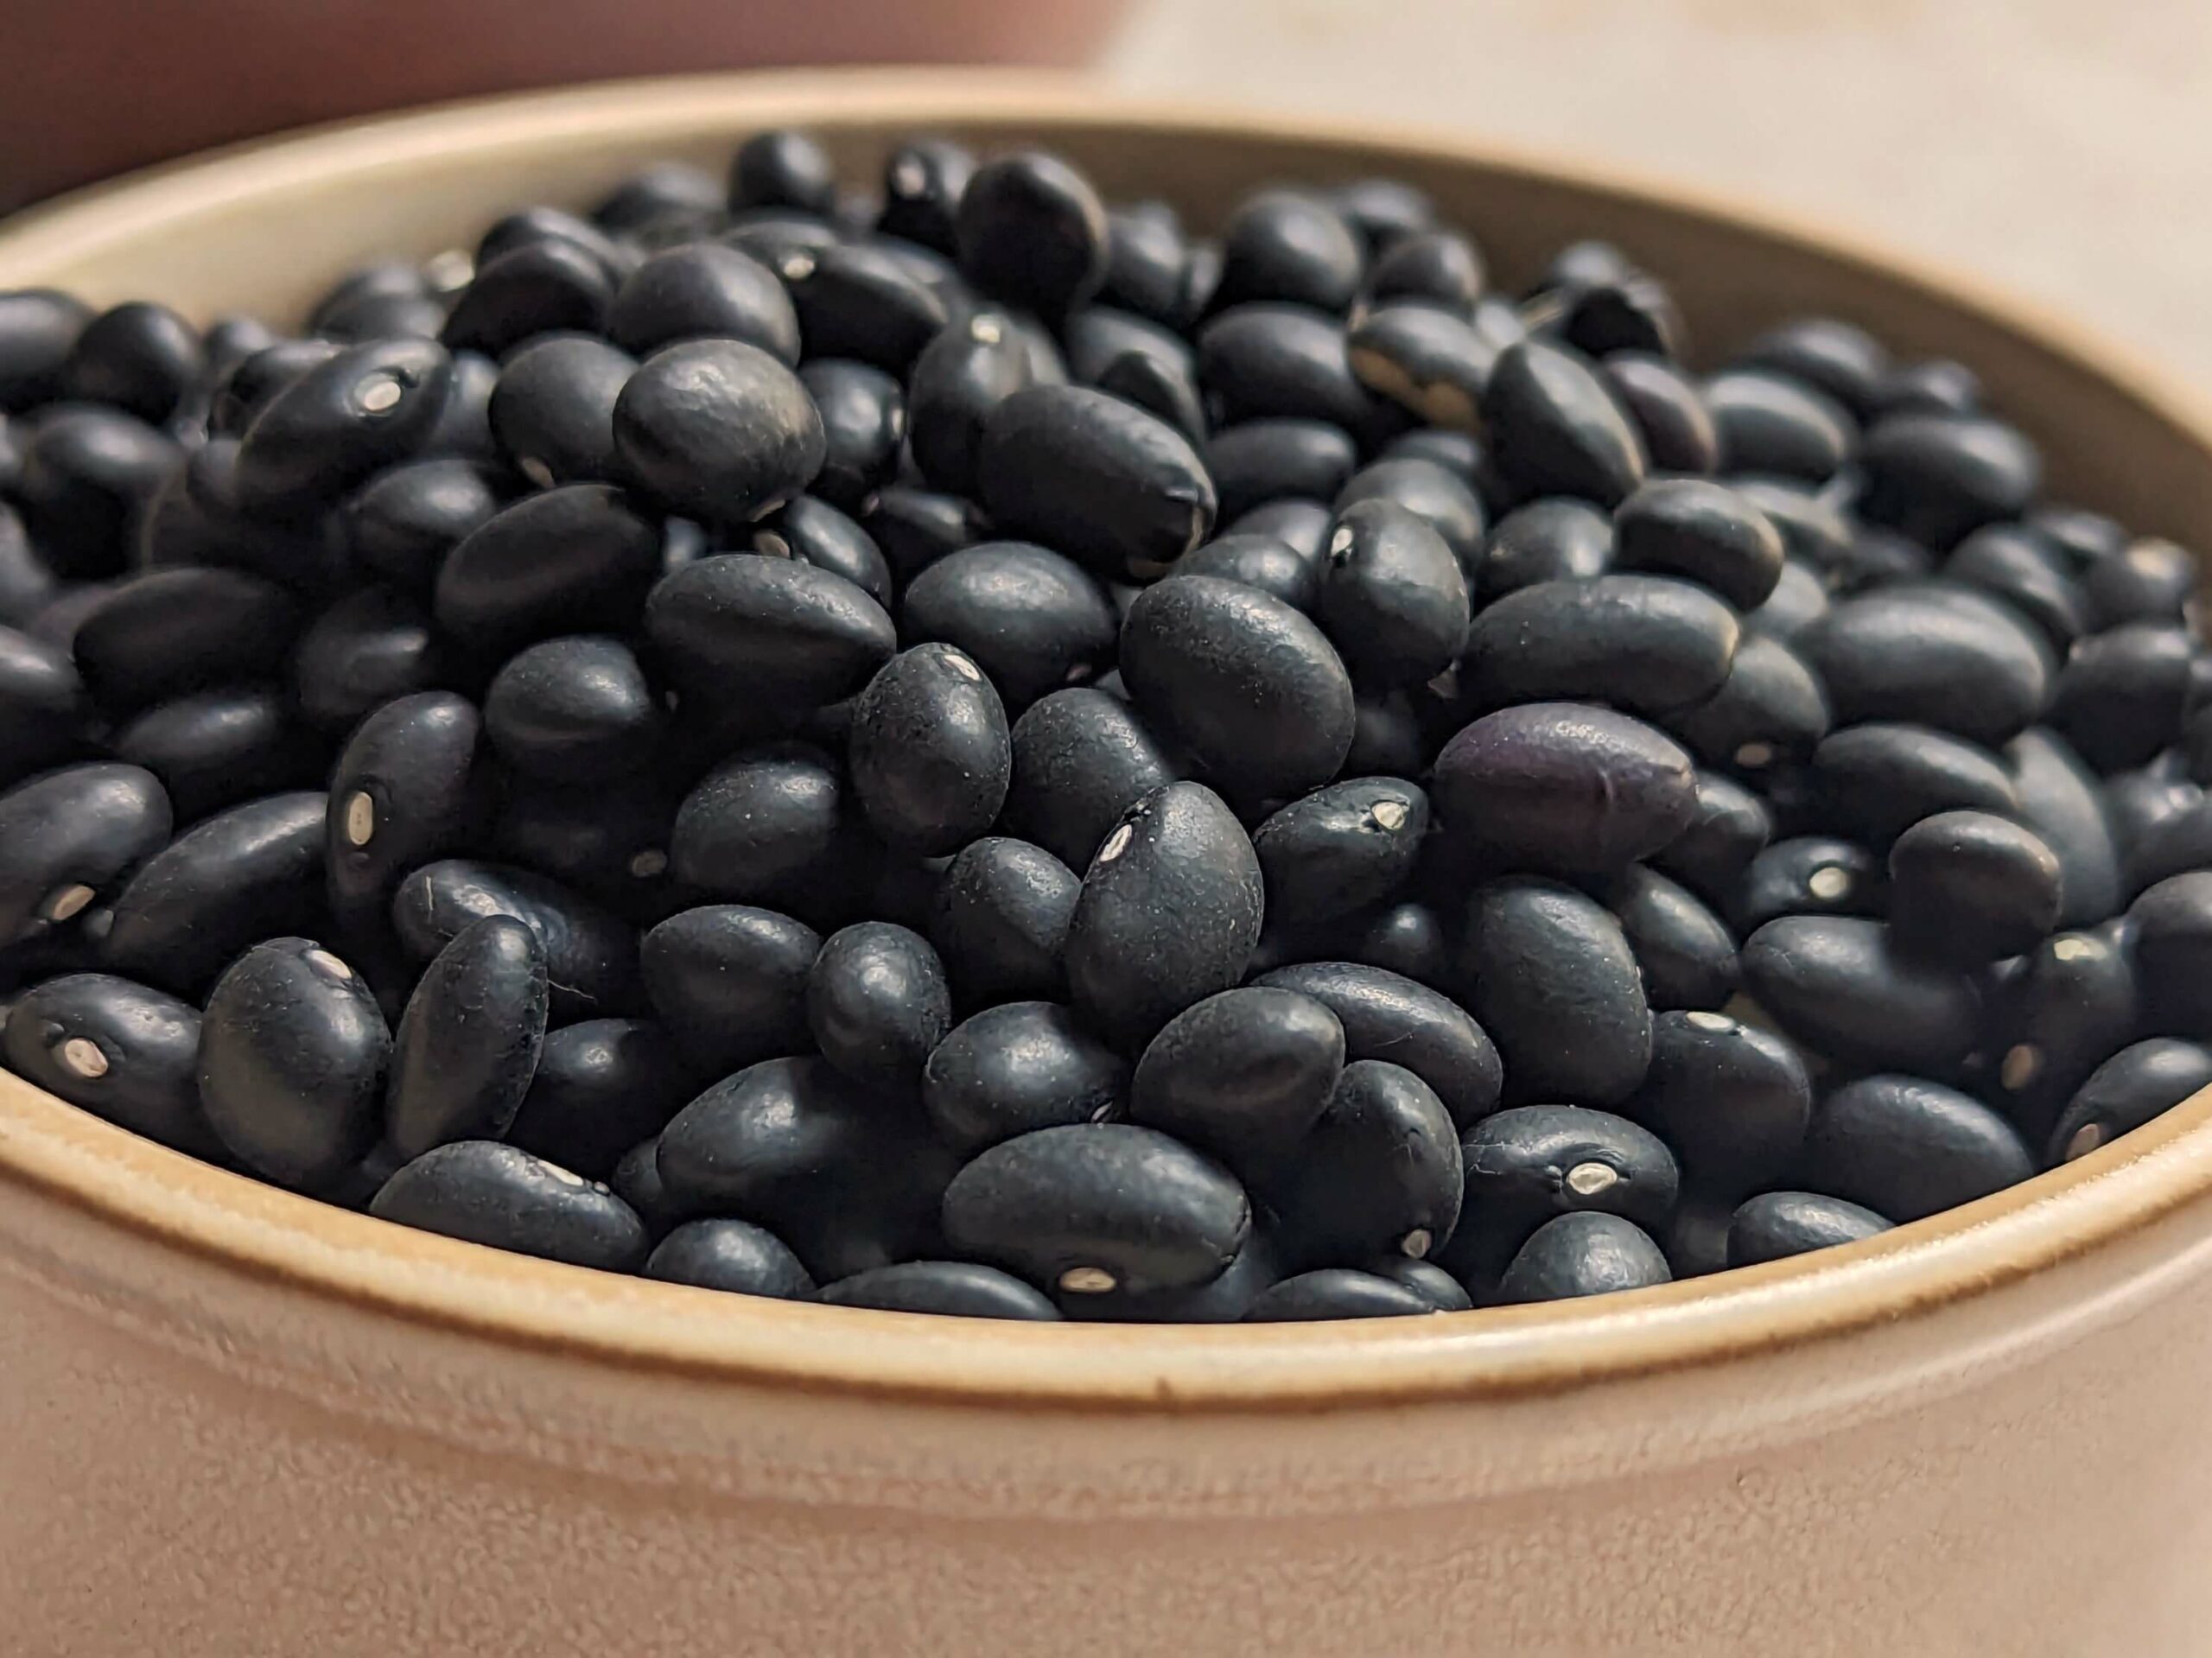 A small bowl of dried black beans.